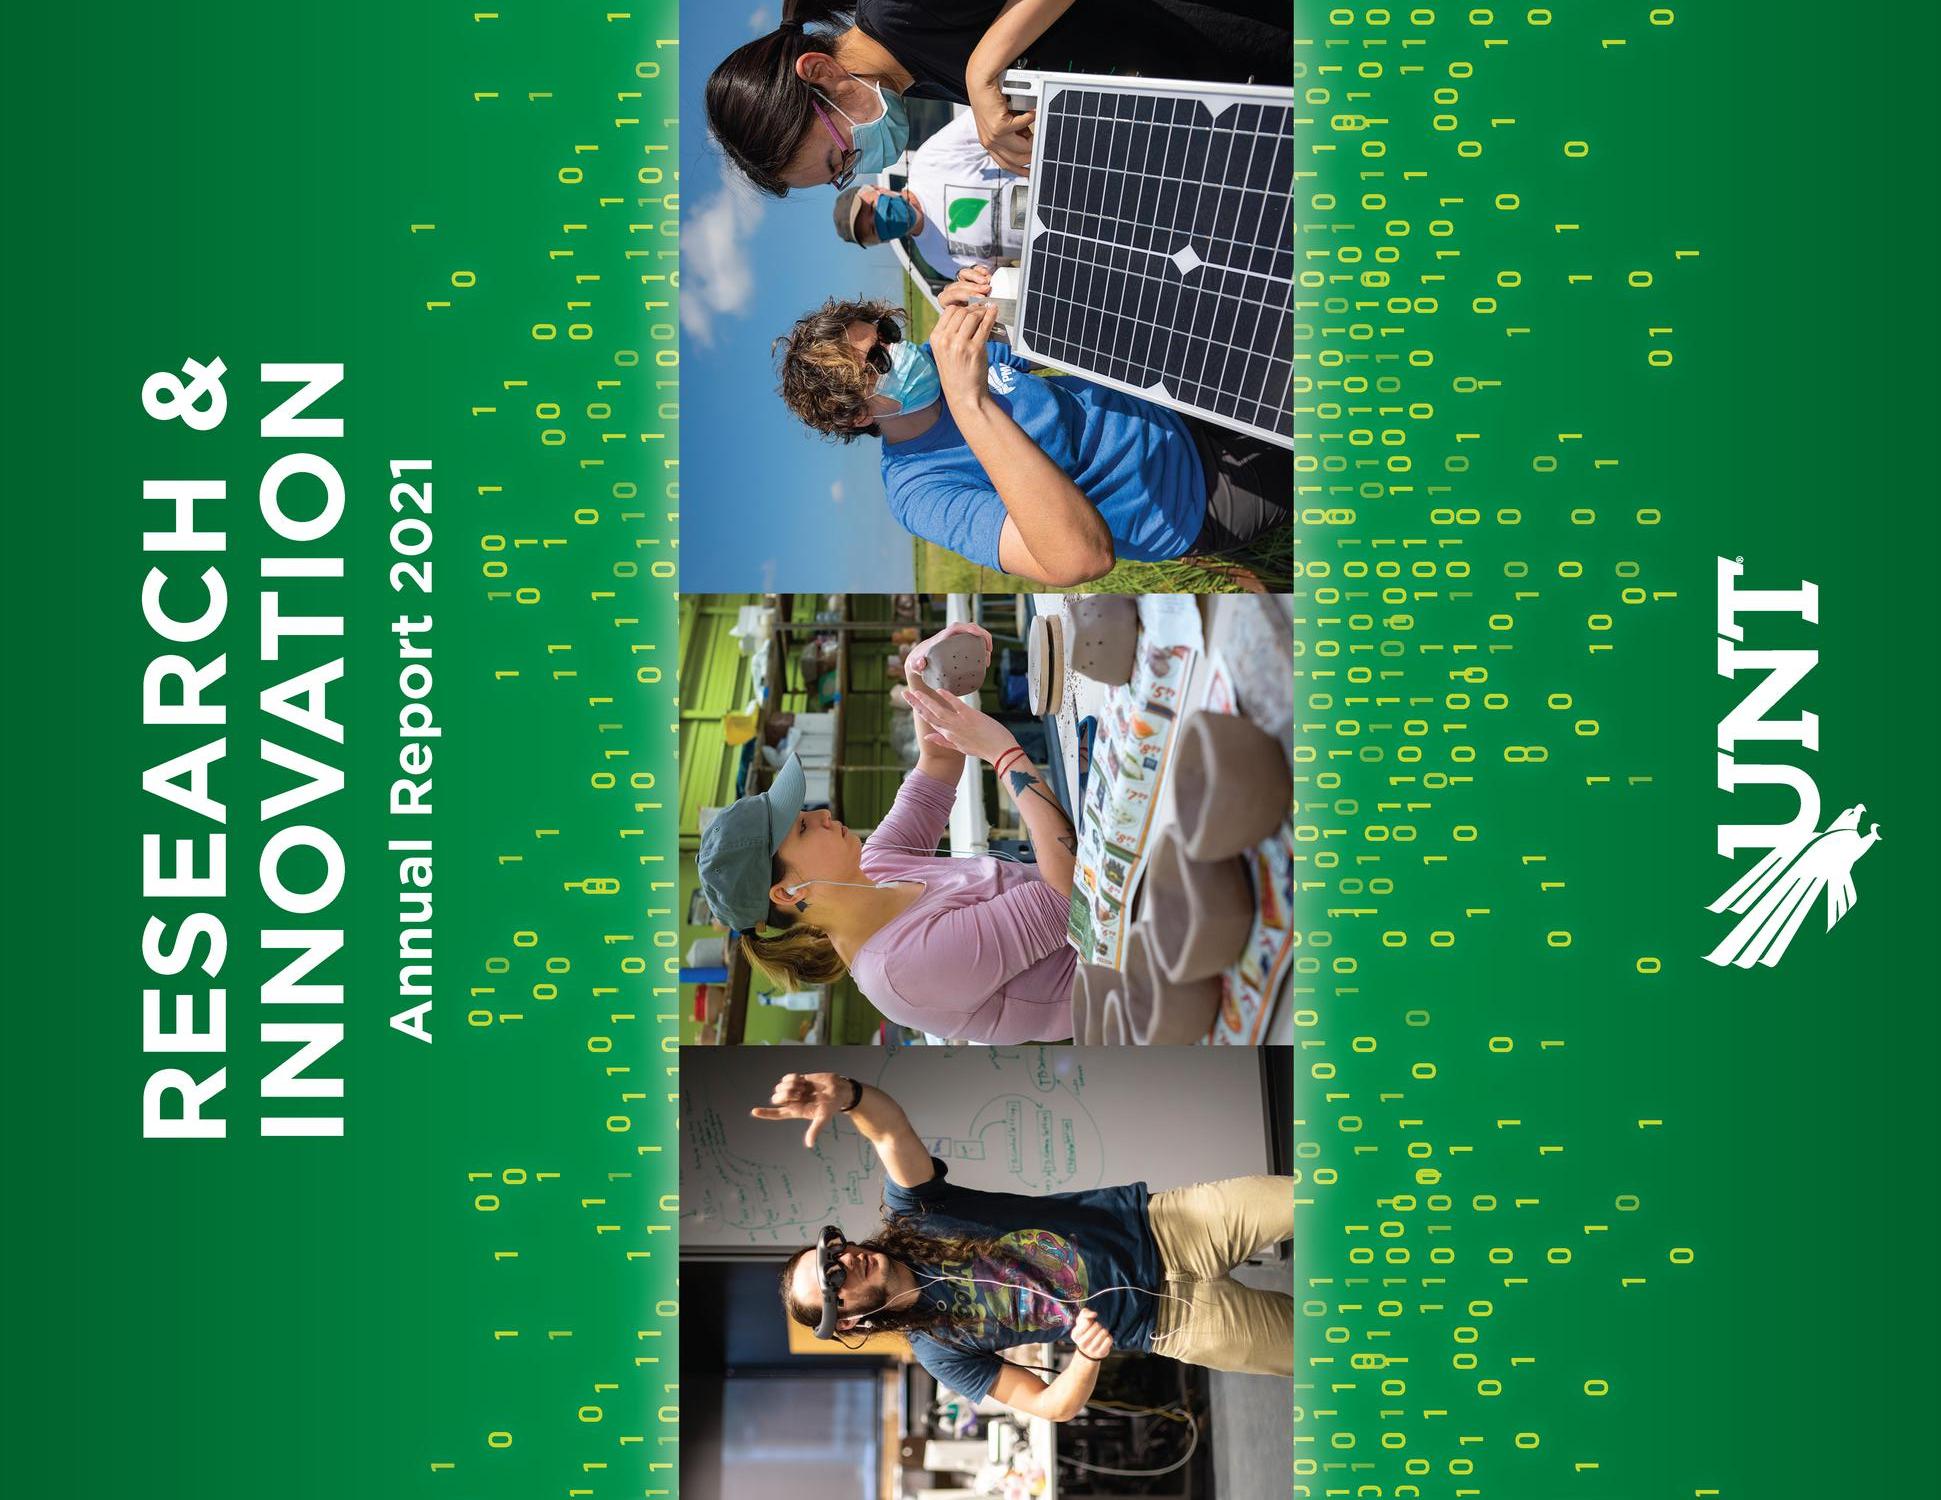 University of North Texas Research and Innovation Annual Report, 2021
                                                
                                                    Front Cover
                                                